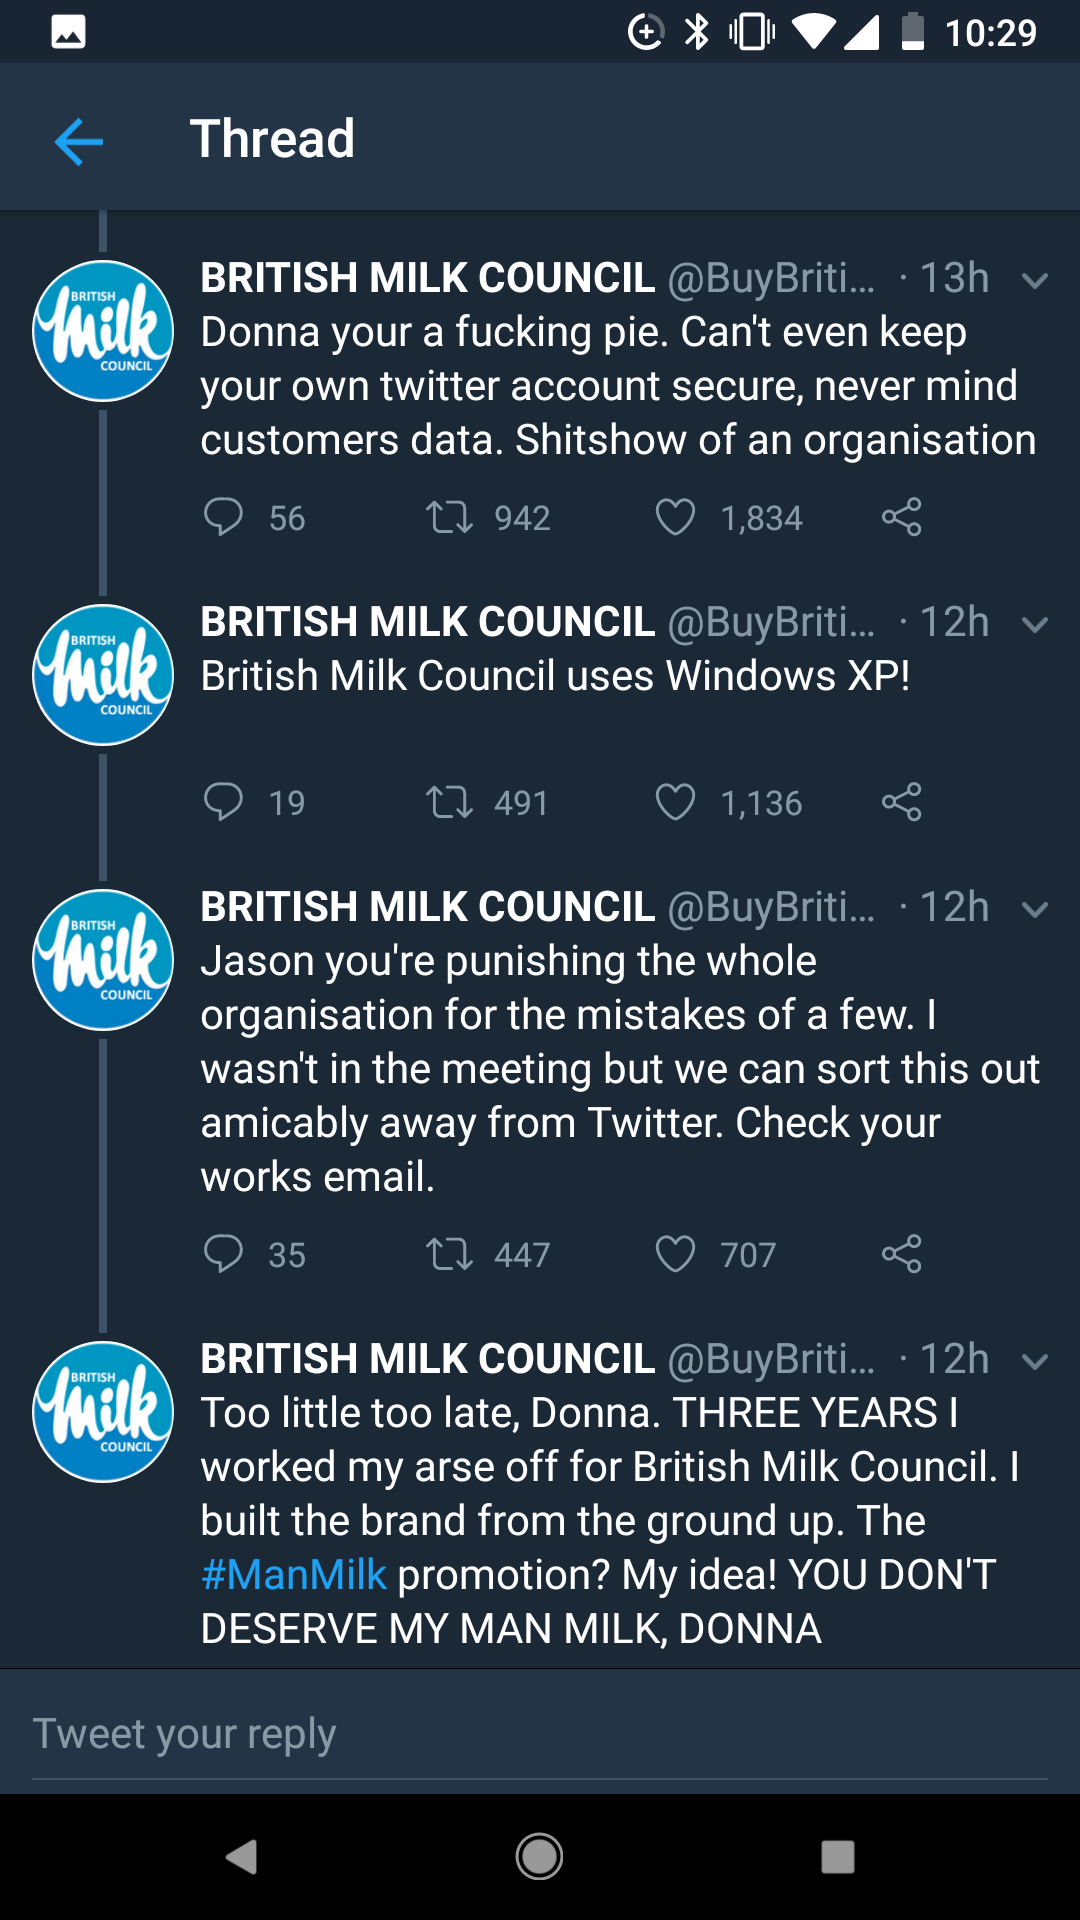 This British Company Tried To Fake A Twitter Feud And It Was Painfully Obvious